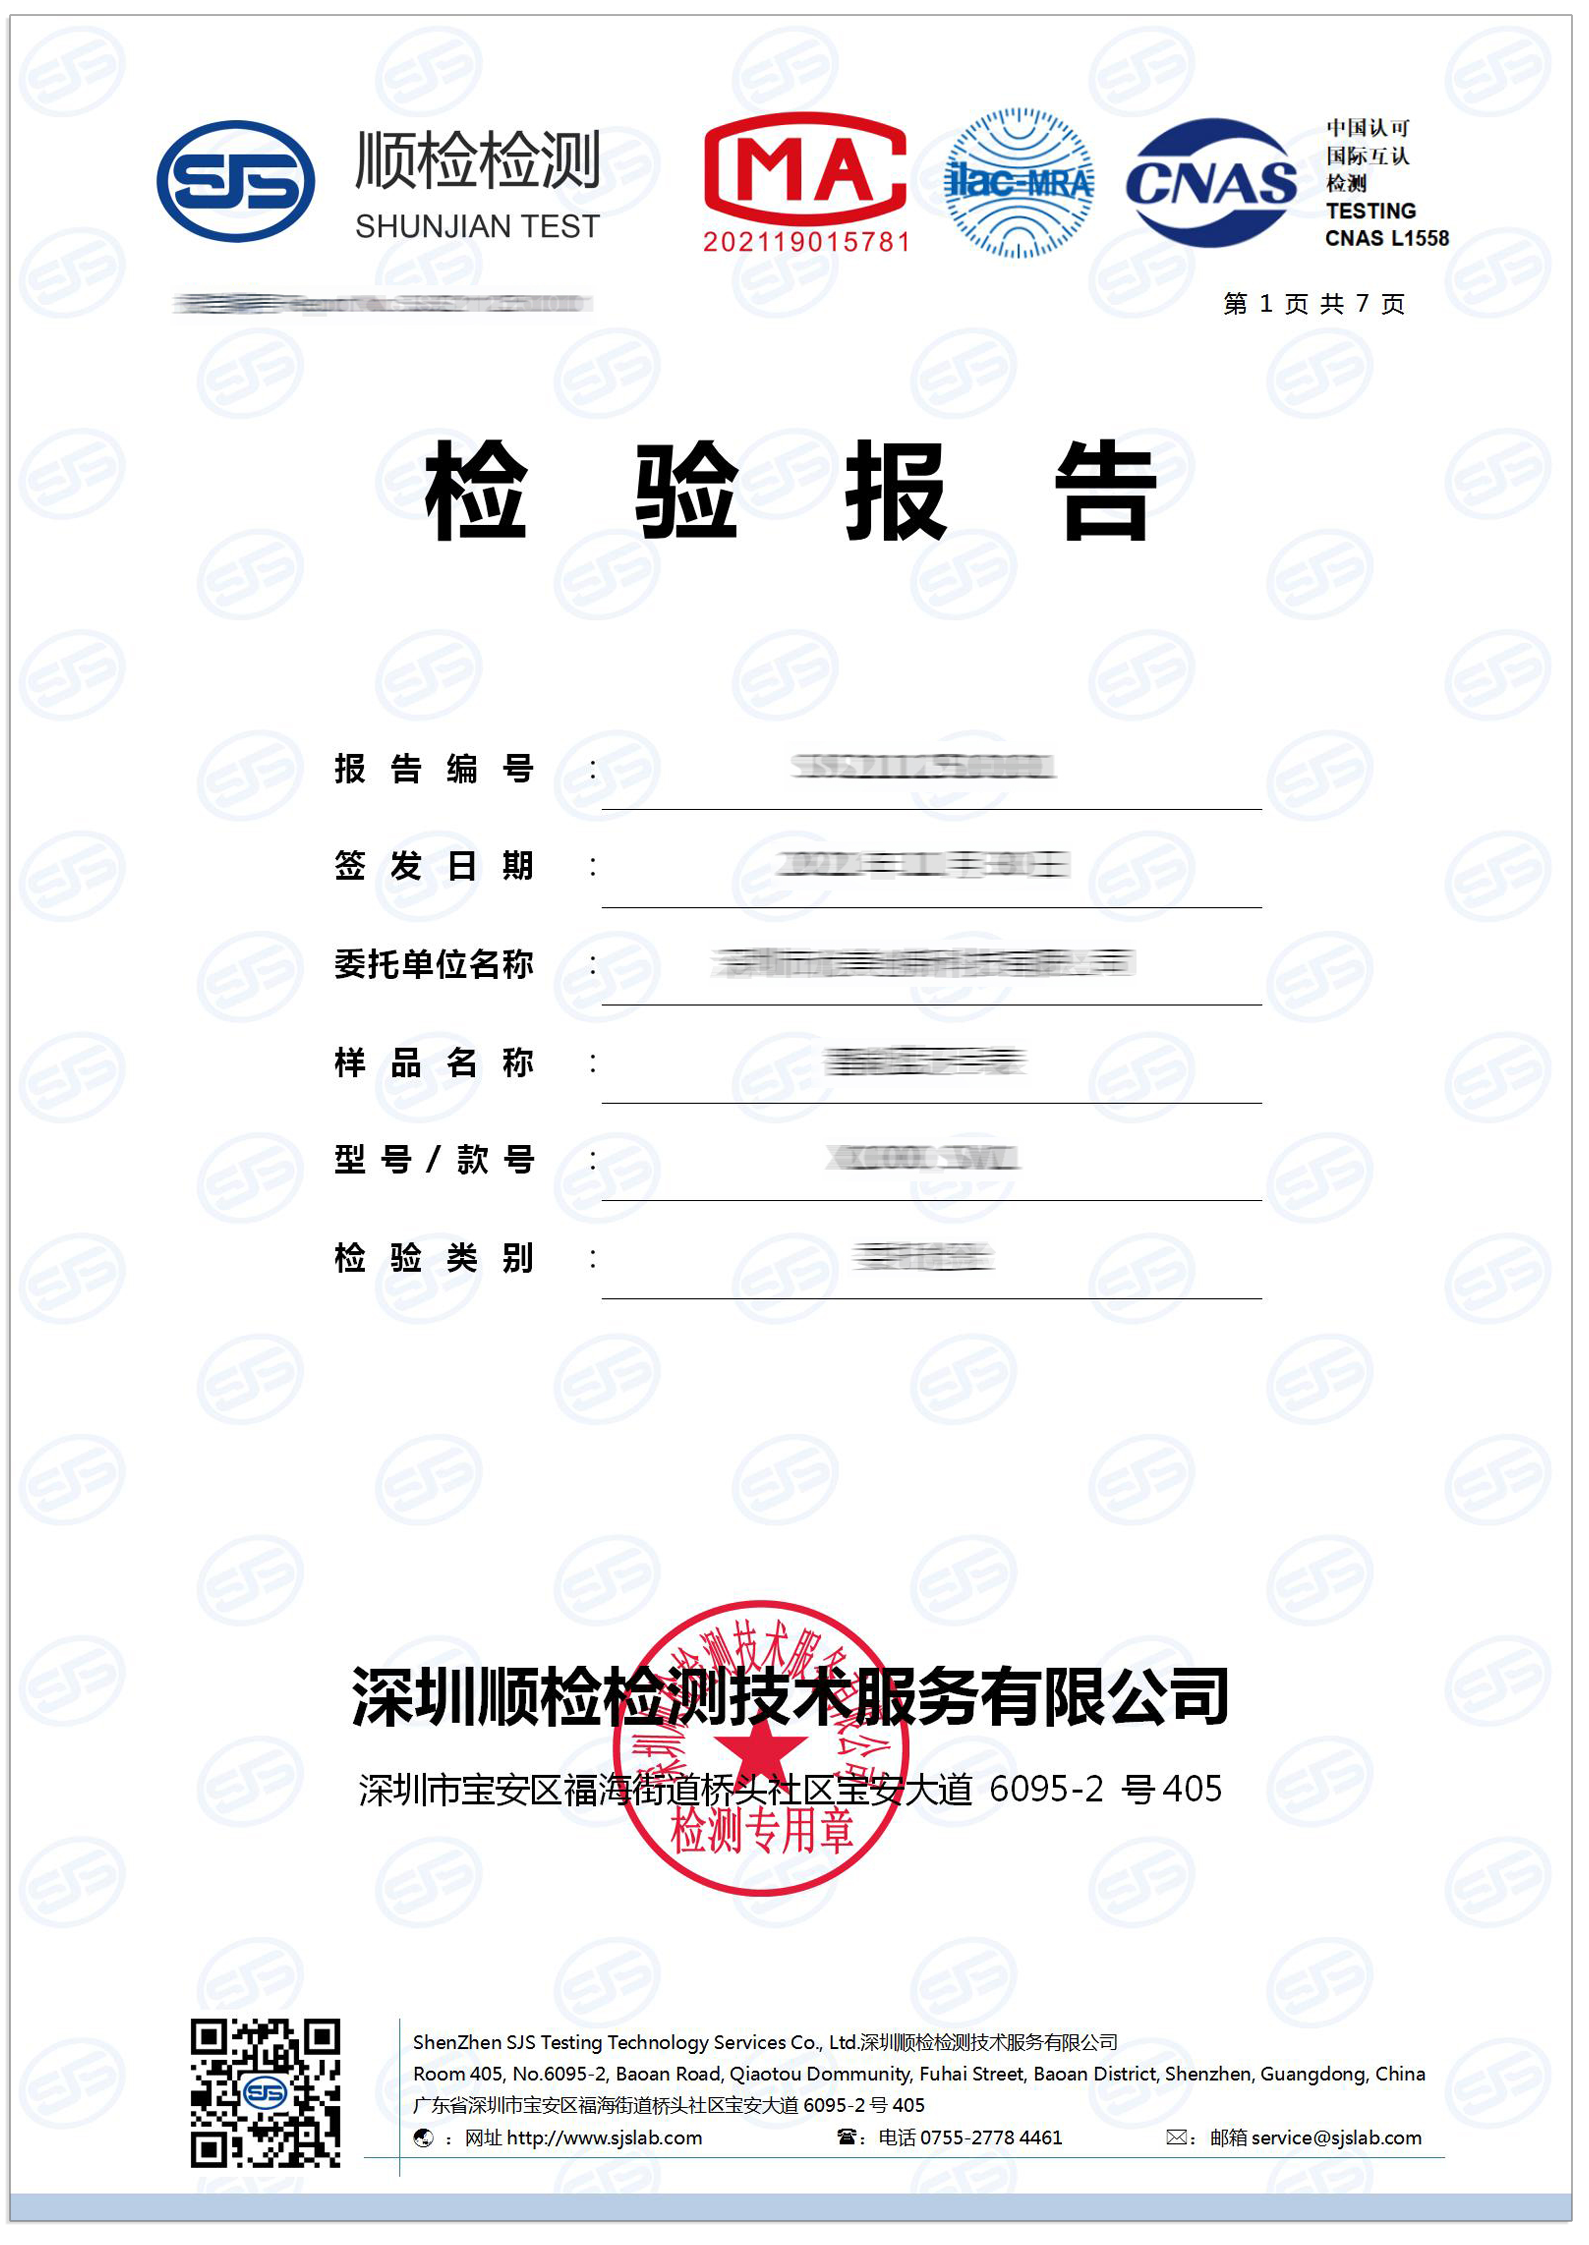 Inspection report(图2)